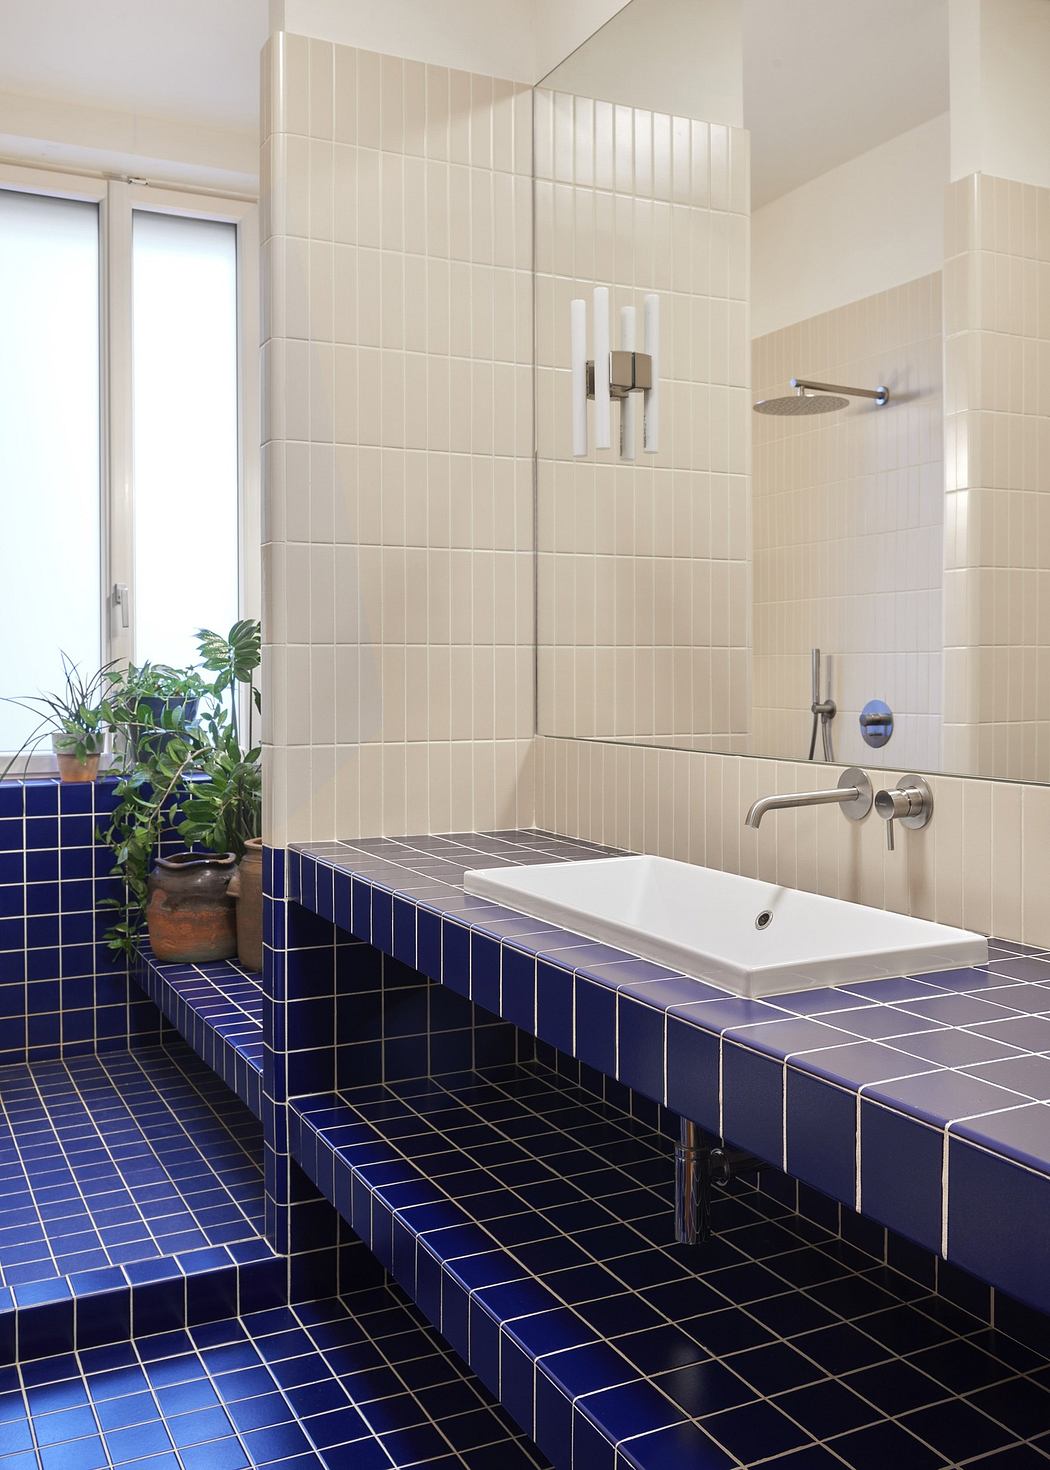 Contemporary bathroom with blue tiled countertop and white basin.